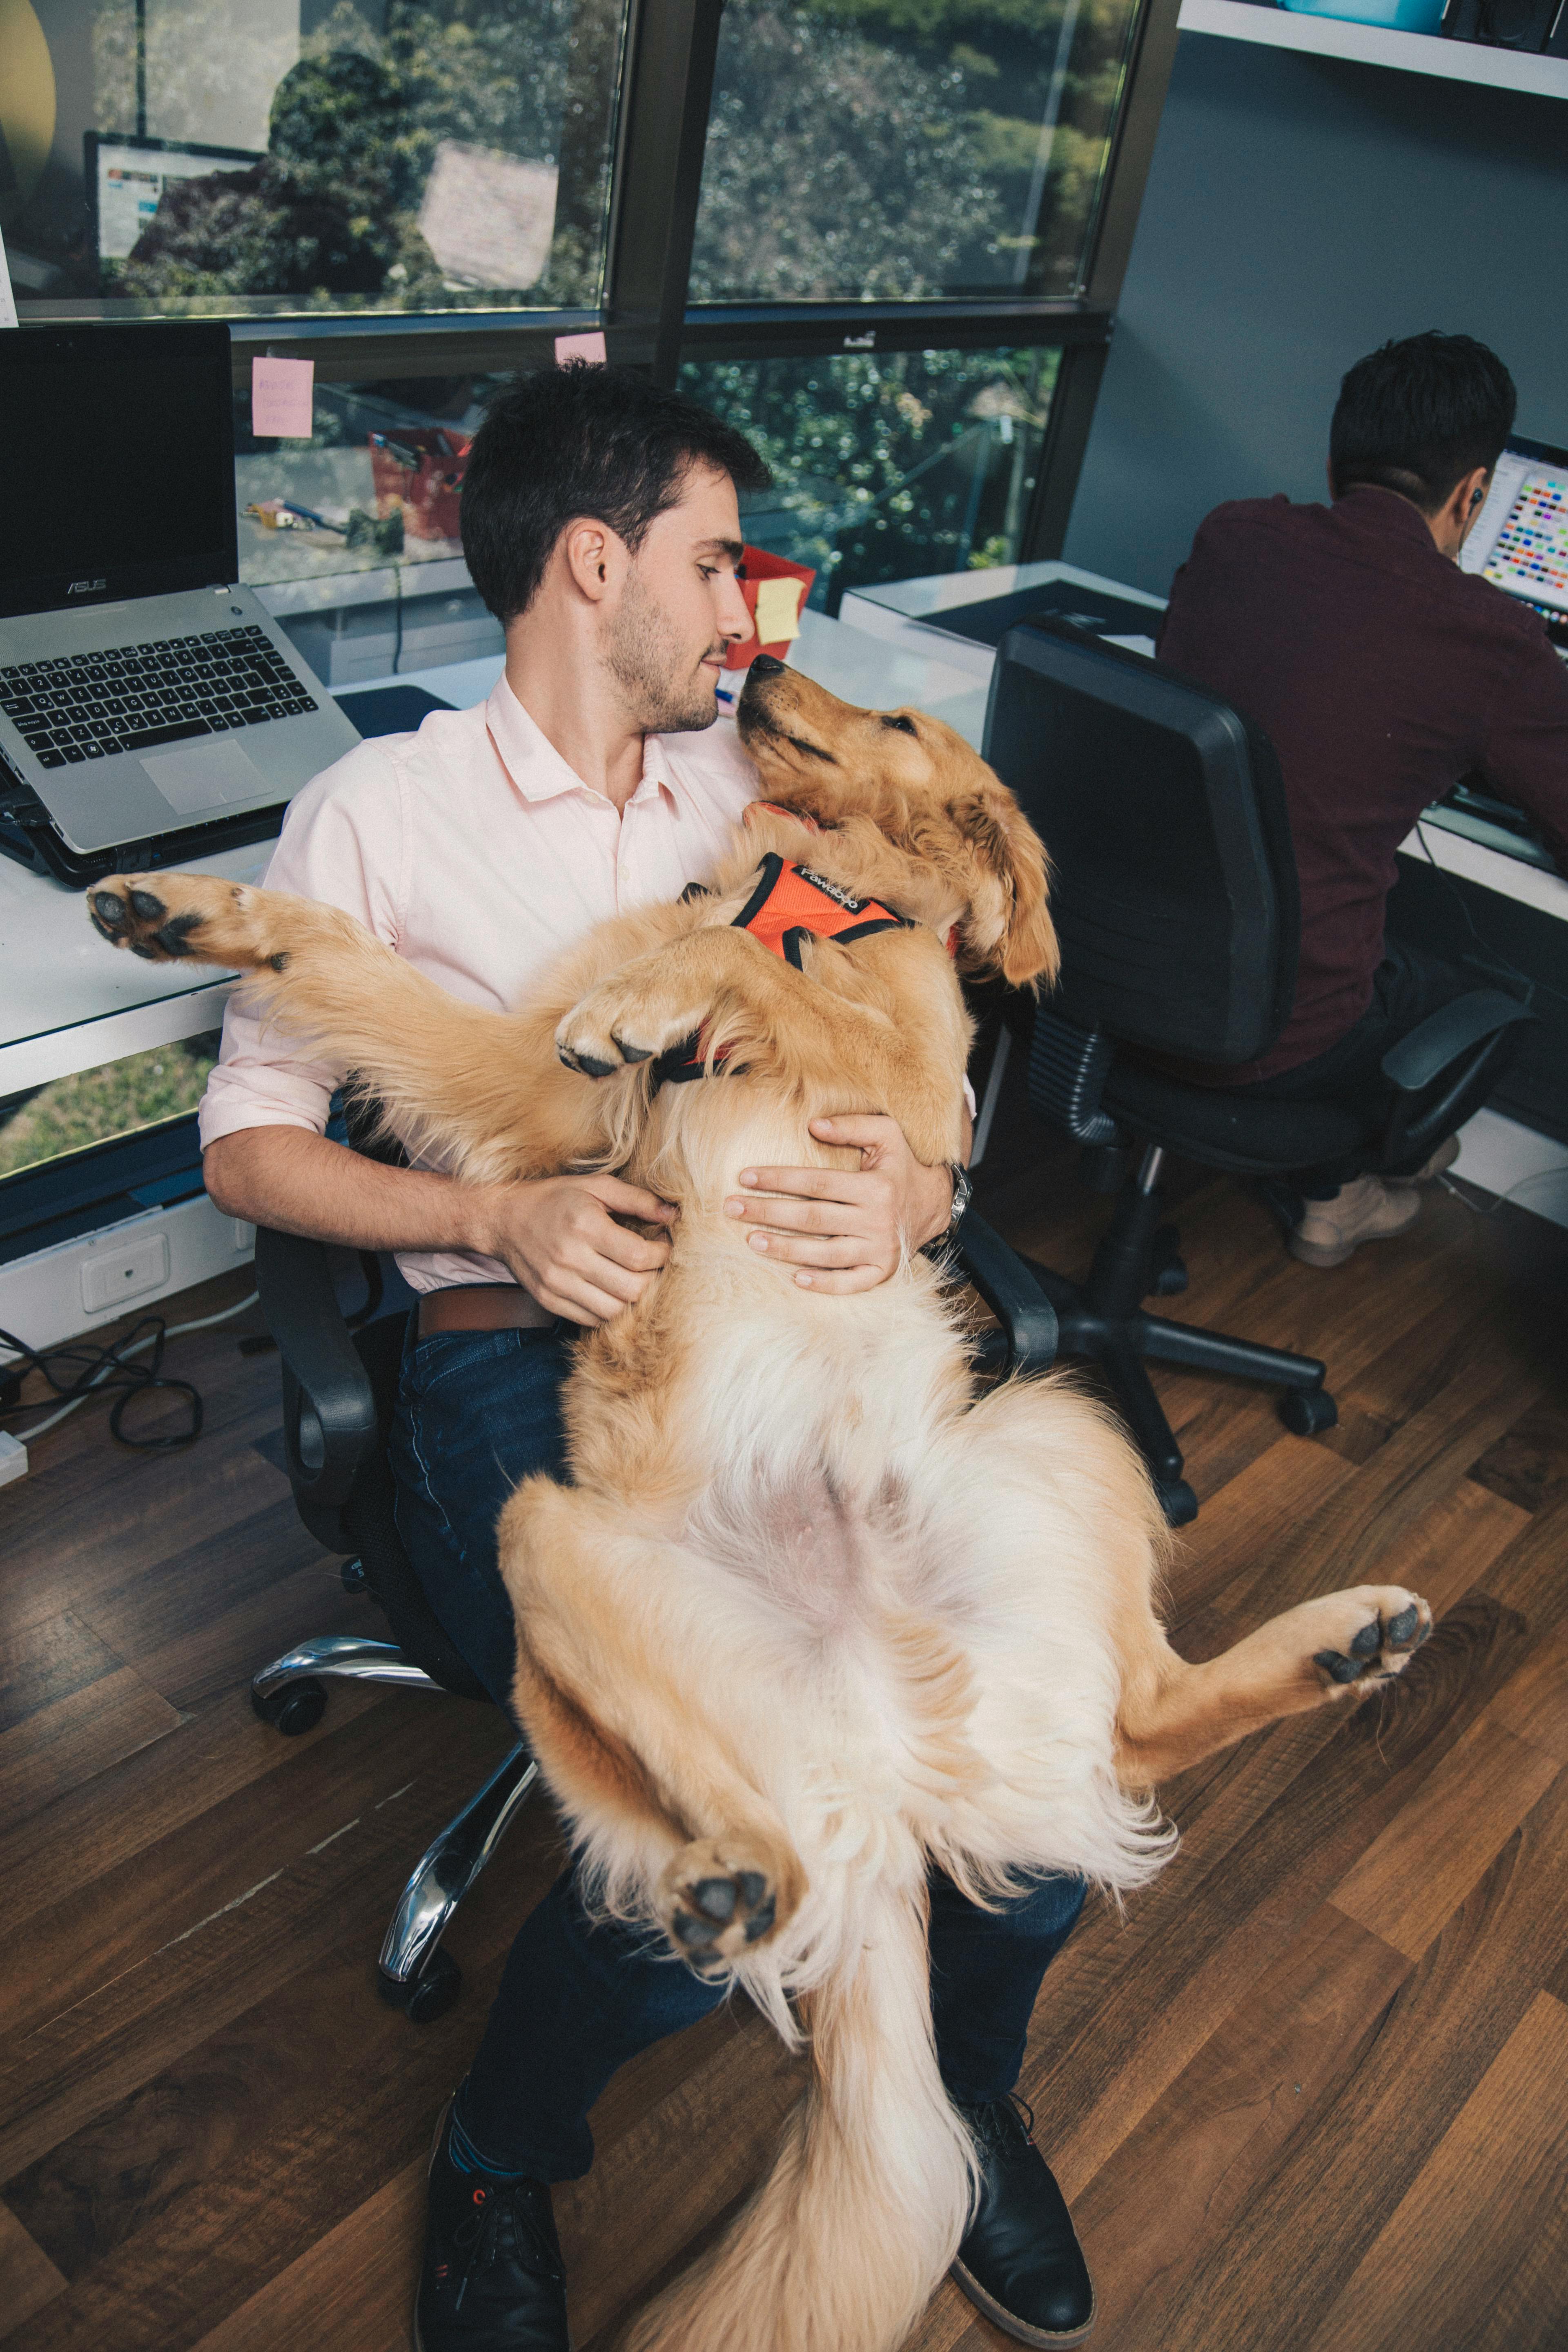 men in an office working holding a dog